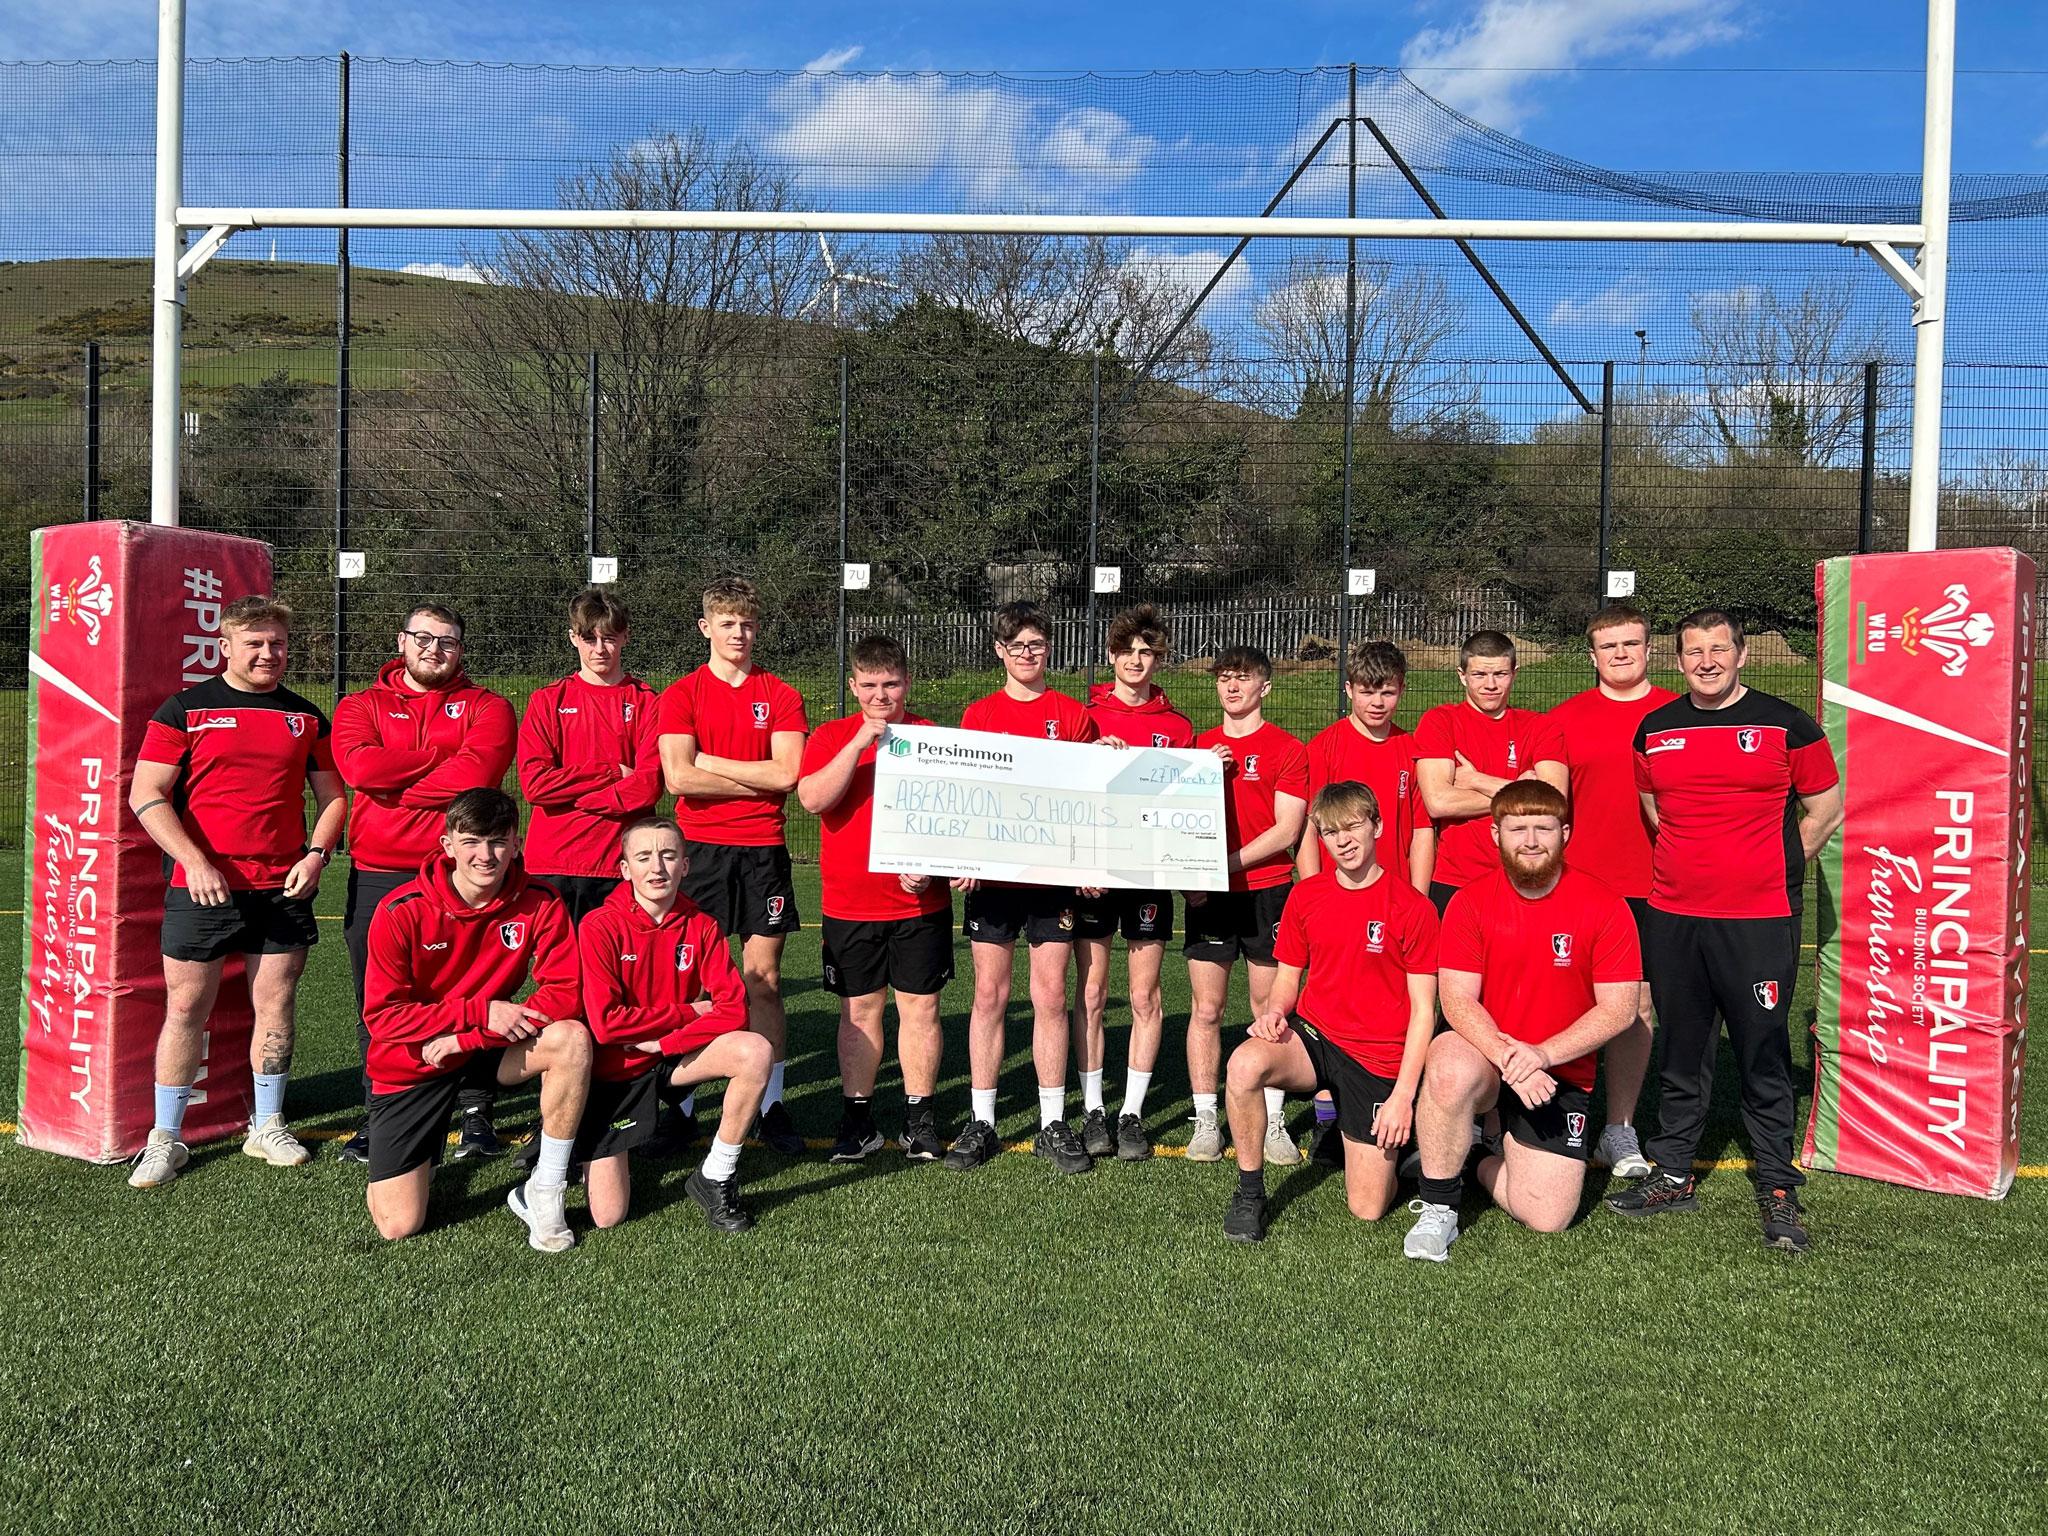 Aberavon Schools Rugby has received £1000 from house-builder Persimmon Homes.